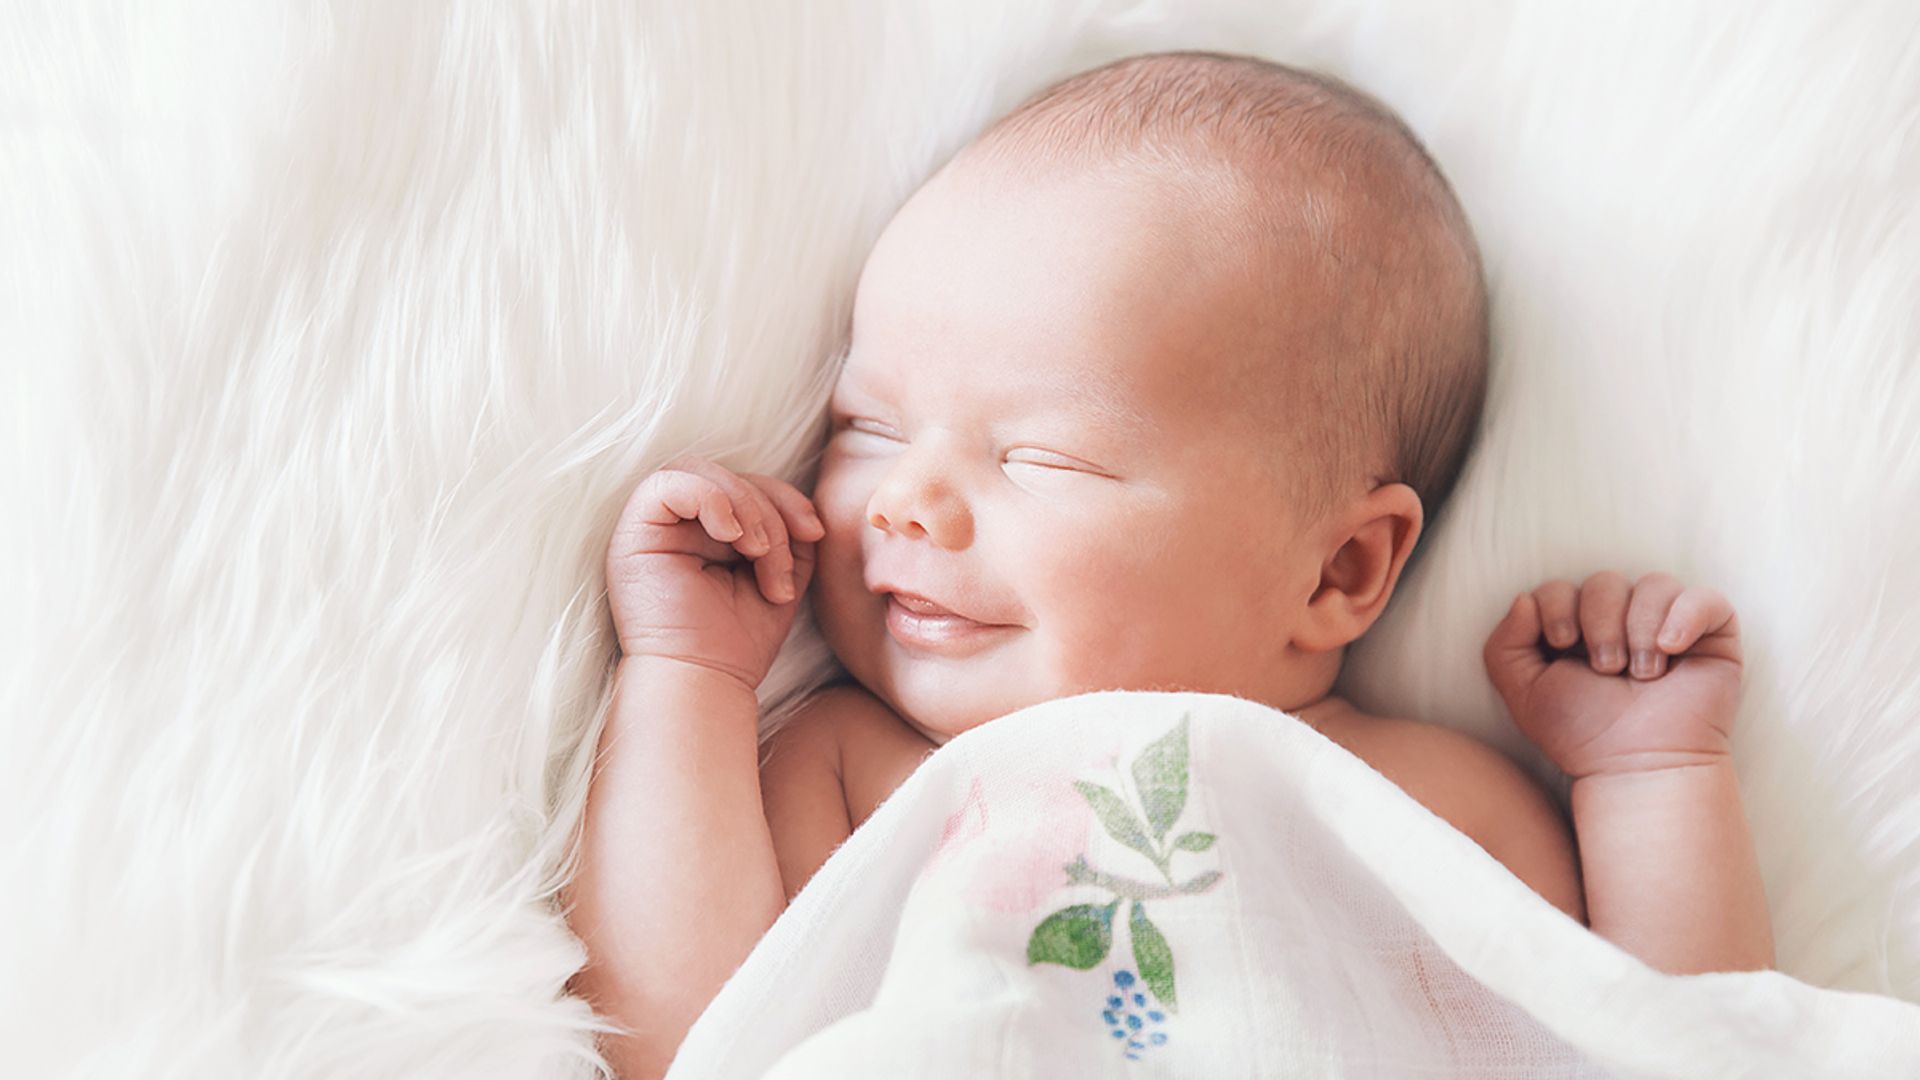 20 most popular baby names and trends to expect in 2023